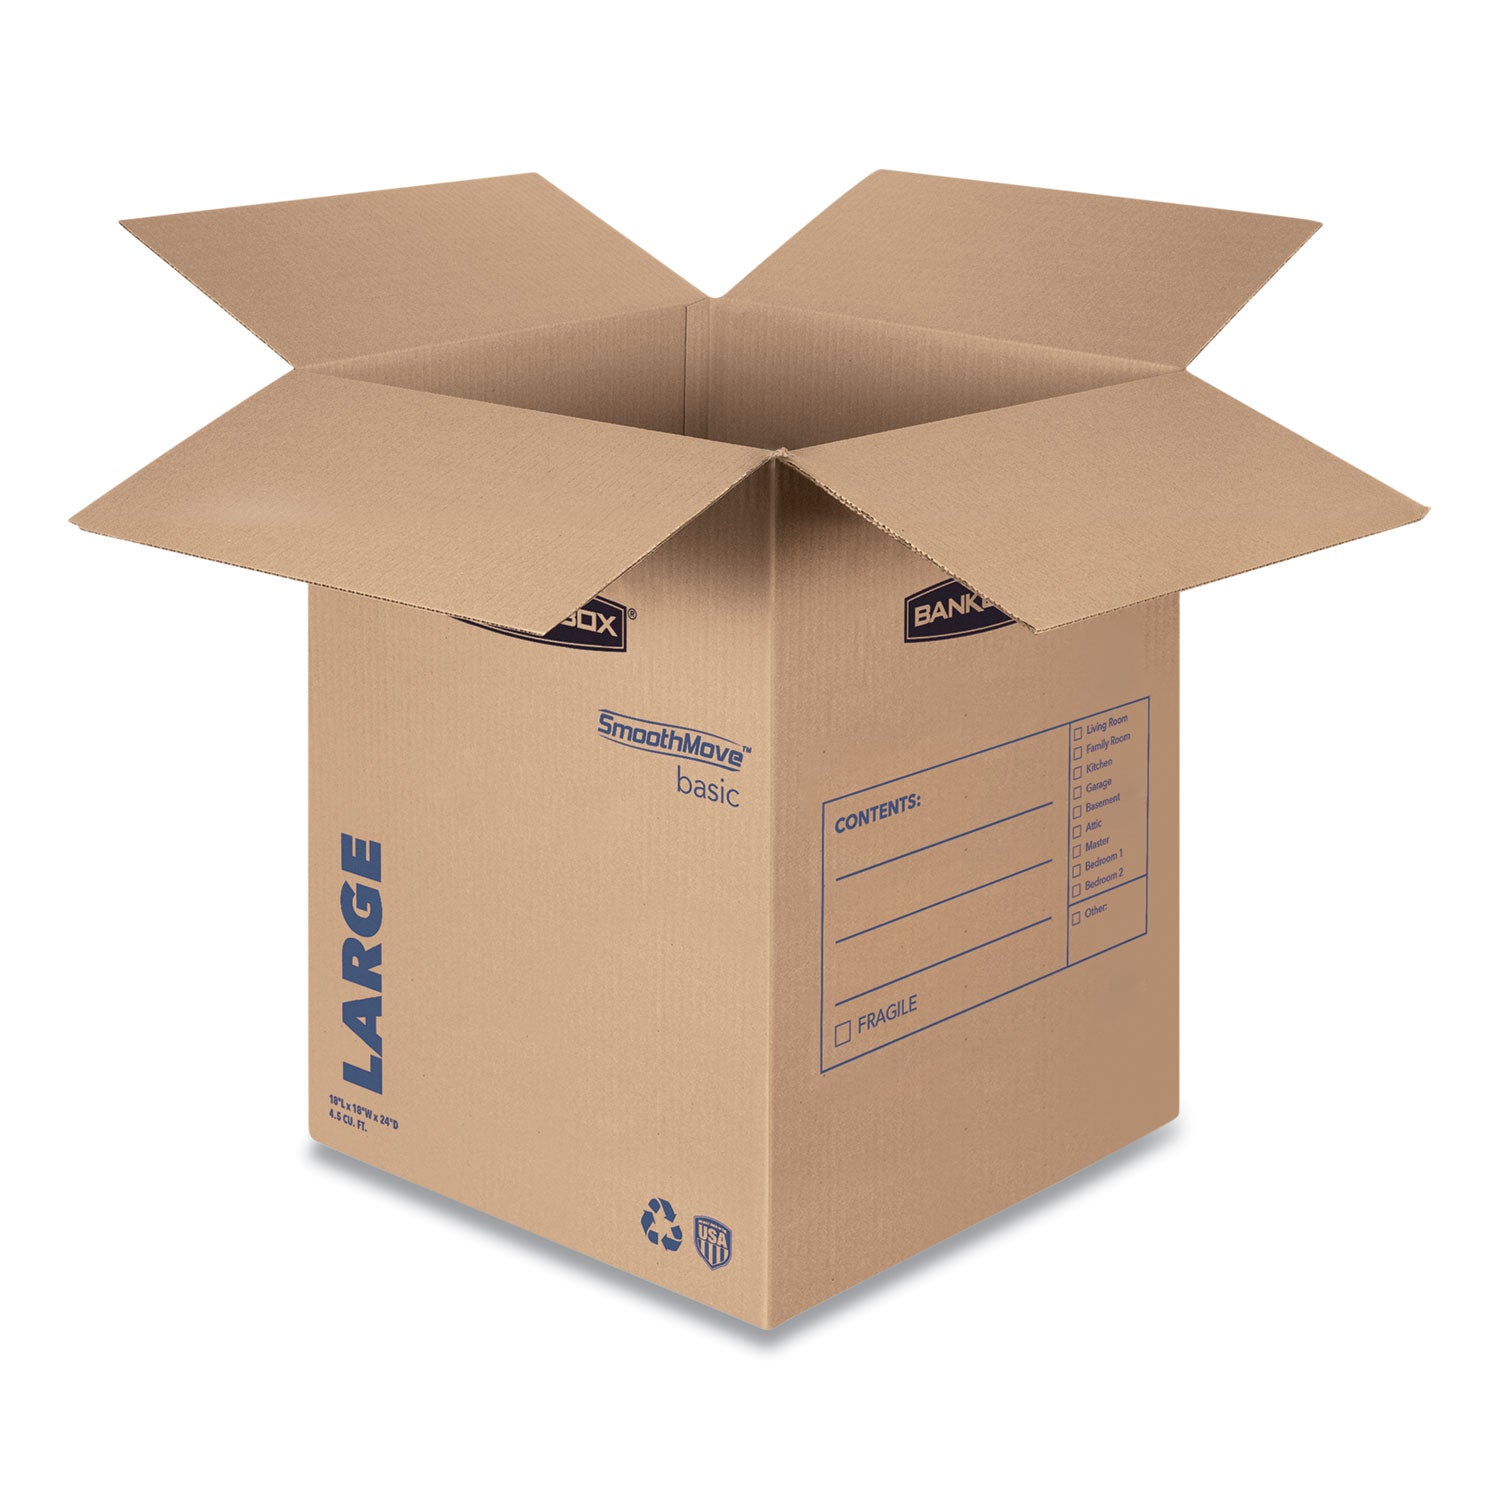 SmoothMove Basic Moving Boxes, Regular Slotted Container (RSC), Large, 18" x 18" x 24", Brown/Blue, 15/Carton - 